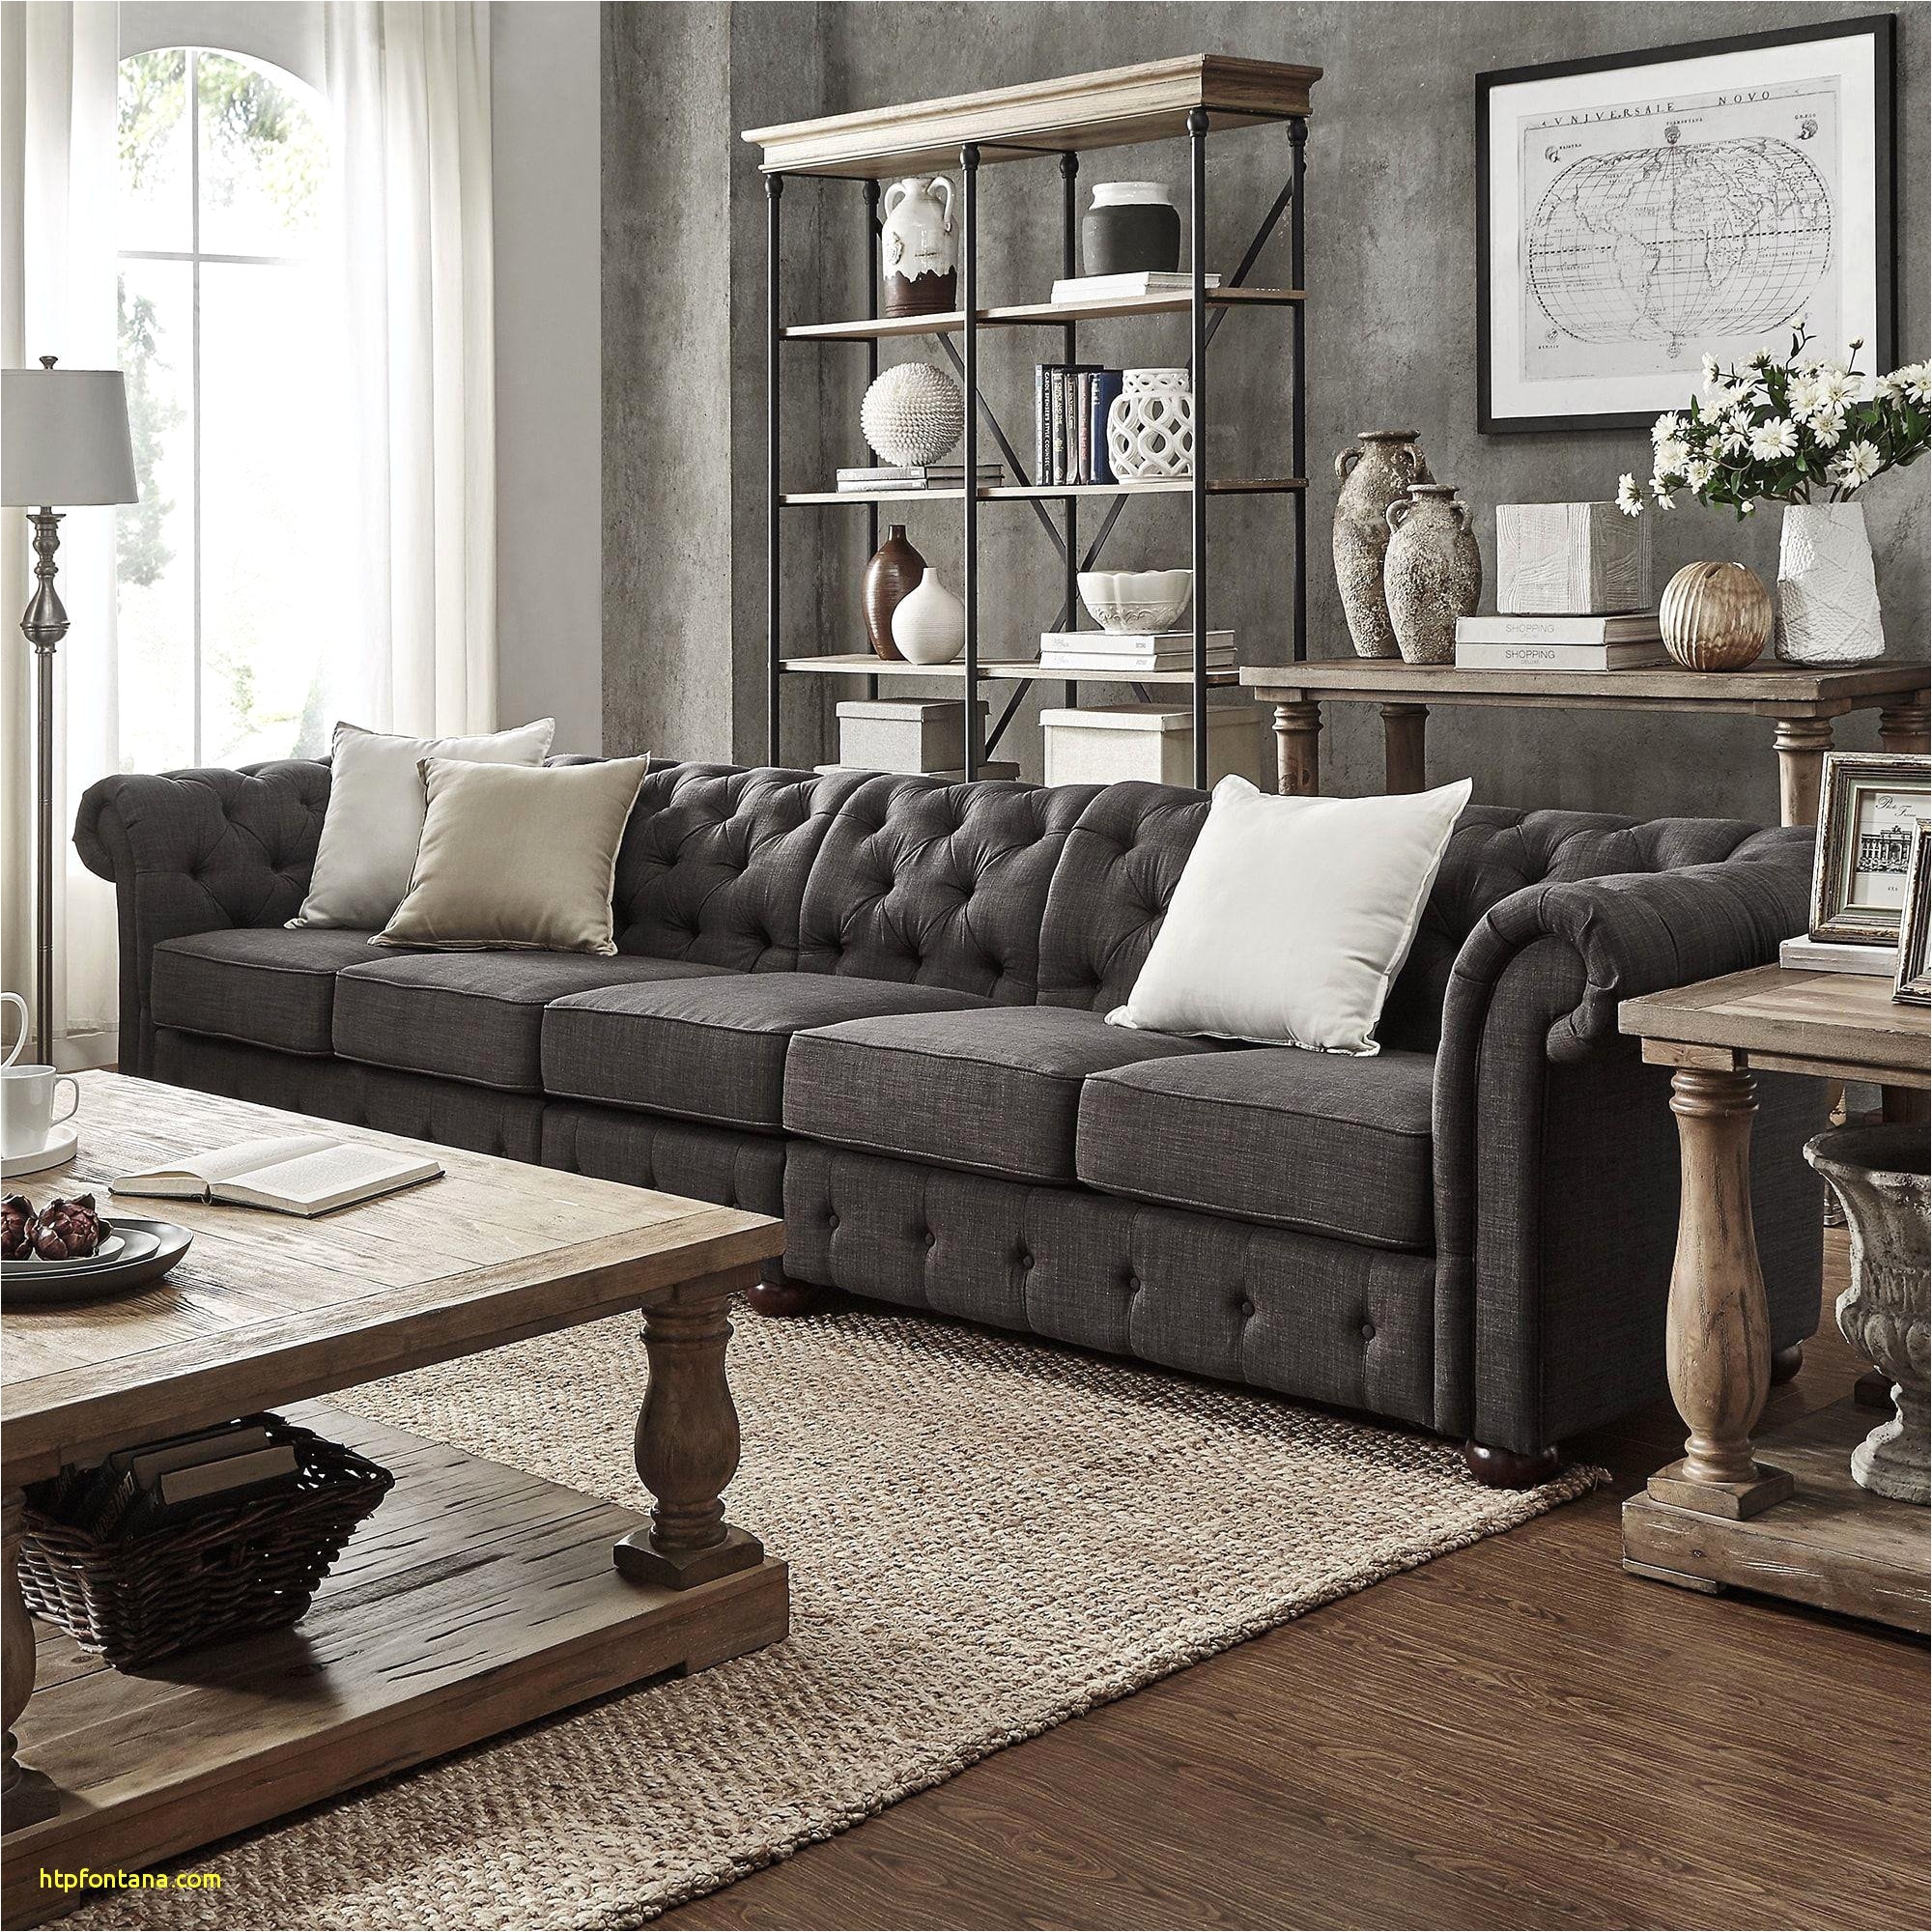 Modern Black Leather Sectionals Inspiration 50 Elegant Modern Leather Sectional sofa Pics 50 s Home